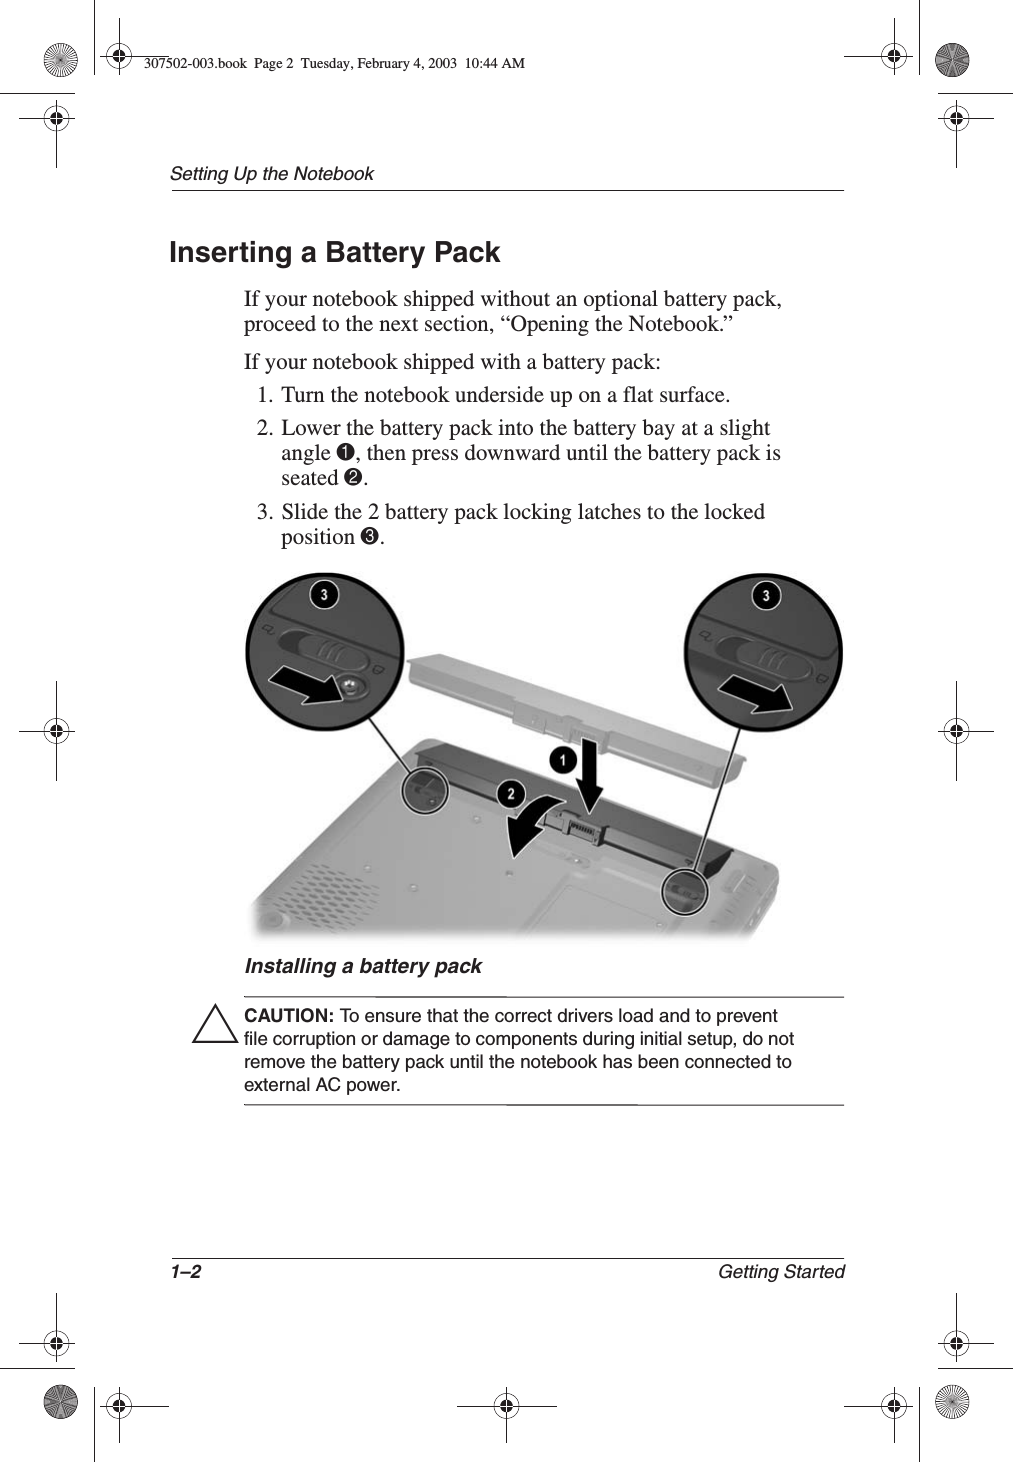 1–2 Getting StartedSetting Up the NotebookInserting a Battery PackIf your notebook shipped without an optional battery pack, proceed to the next section, “Opening the Notebook.”If your notebook shipped with a battery pack: 1. Turn the notebook underside up on a flat surface.2. Lower the battery pack into the battery bay at a slight angle 1, then press downward until the battery pack is seated 2.3. Slide the 2 battery pack locking latches to the locked position 3.Installing a battery packÄCAUTION: To ensure that the correct drivers load and to prevent file corruption or damage to components during initial setup, do not remove the battery pack until the notebook has been connected to external AC power.307502-003.book  Page 2  Tuesday, February 4, 2003  10:44 AM